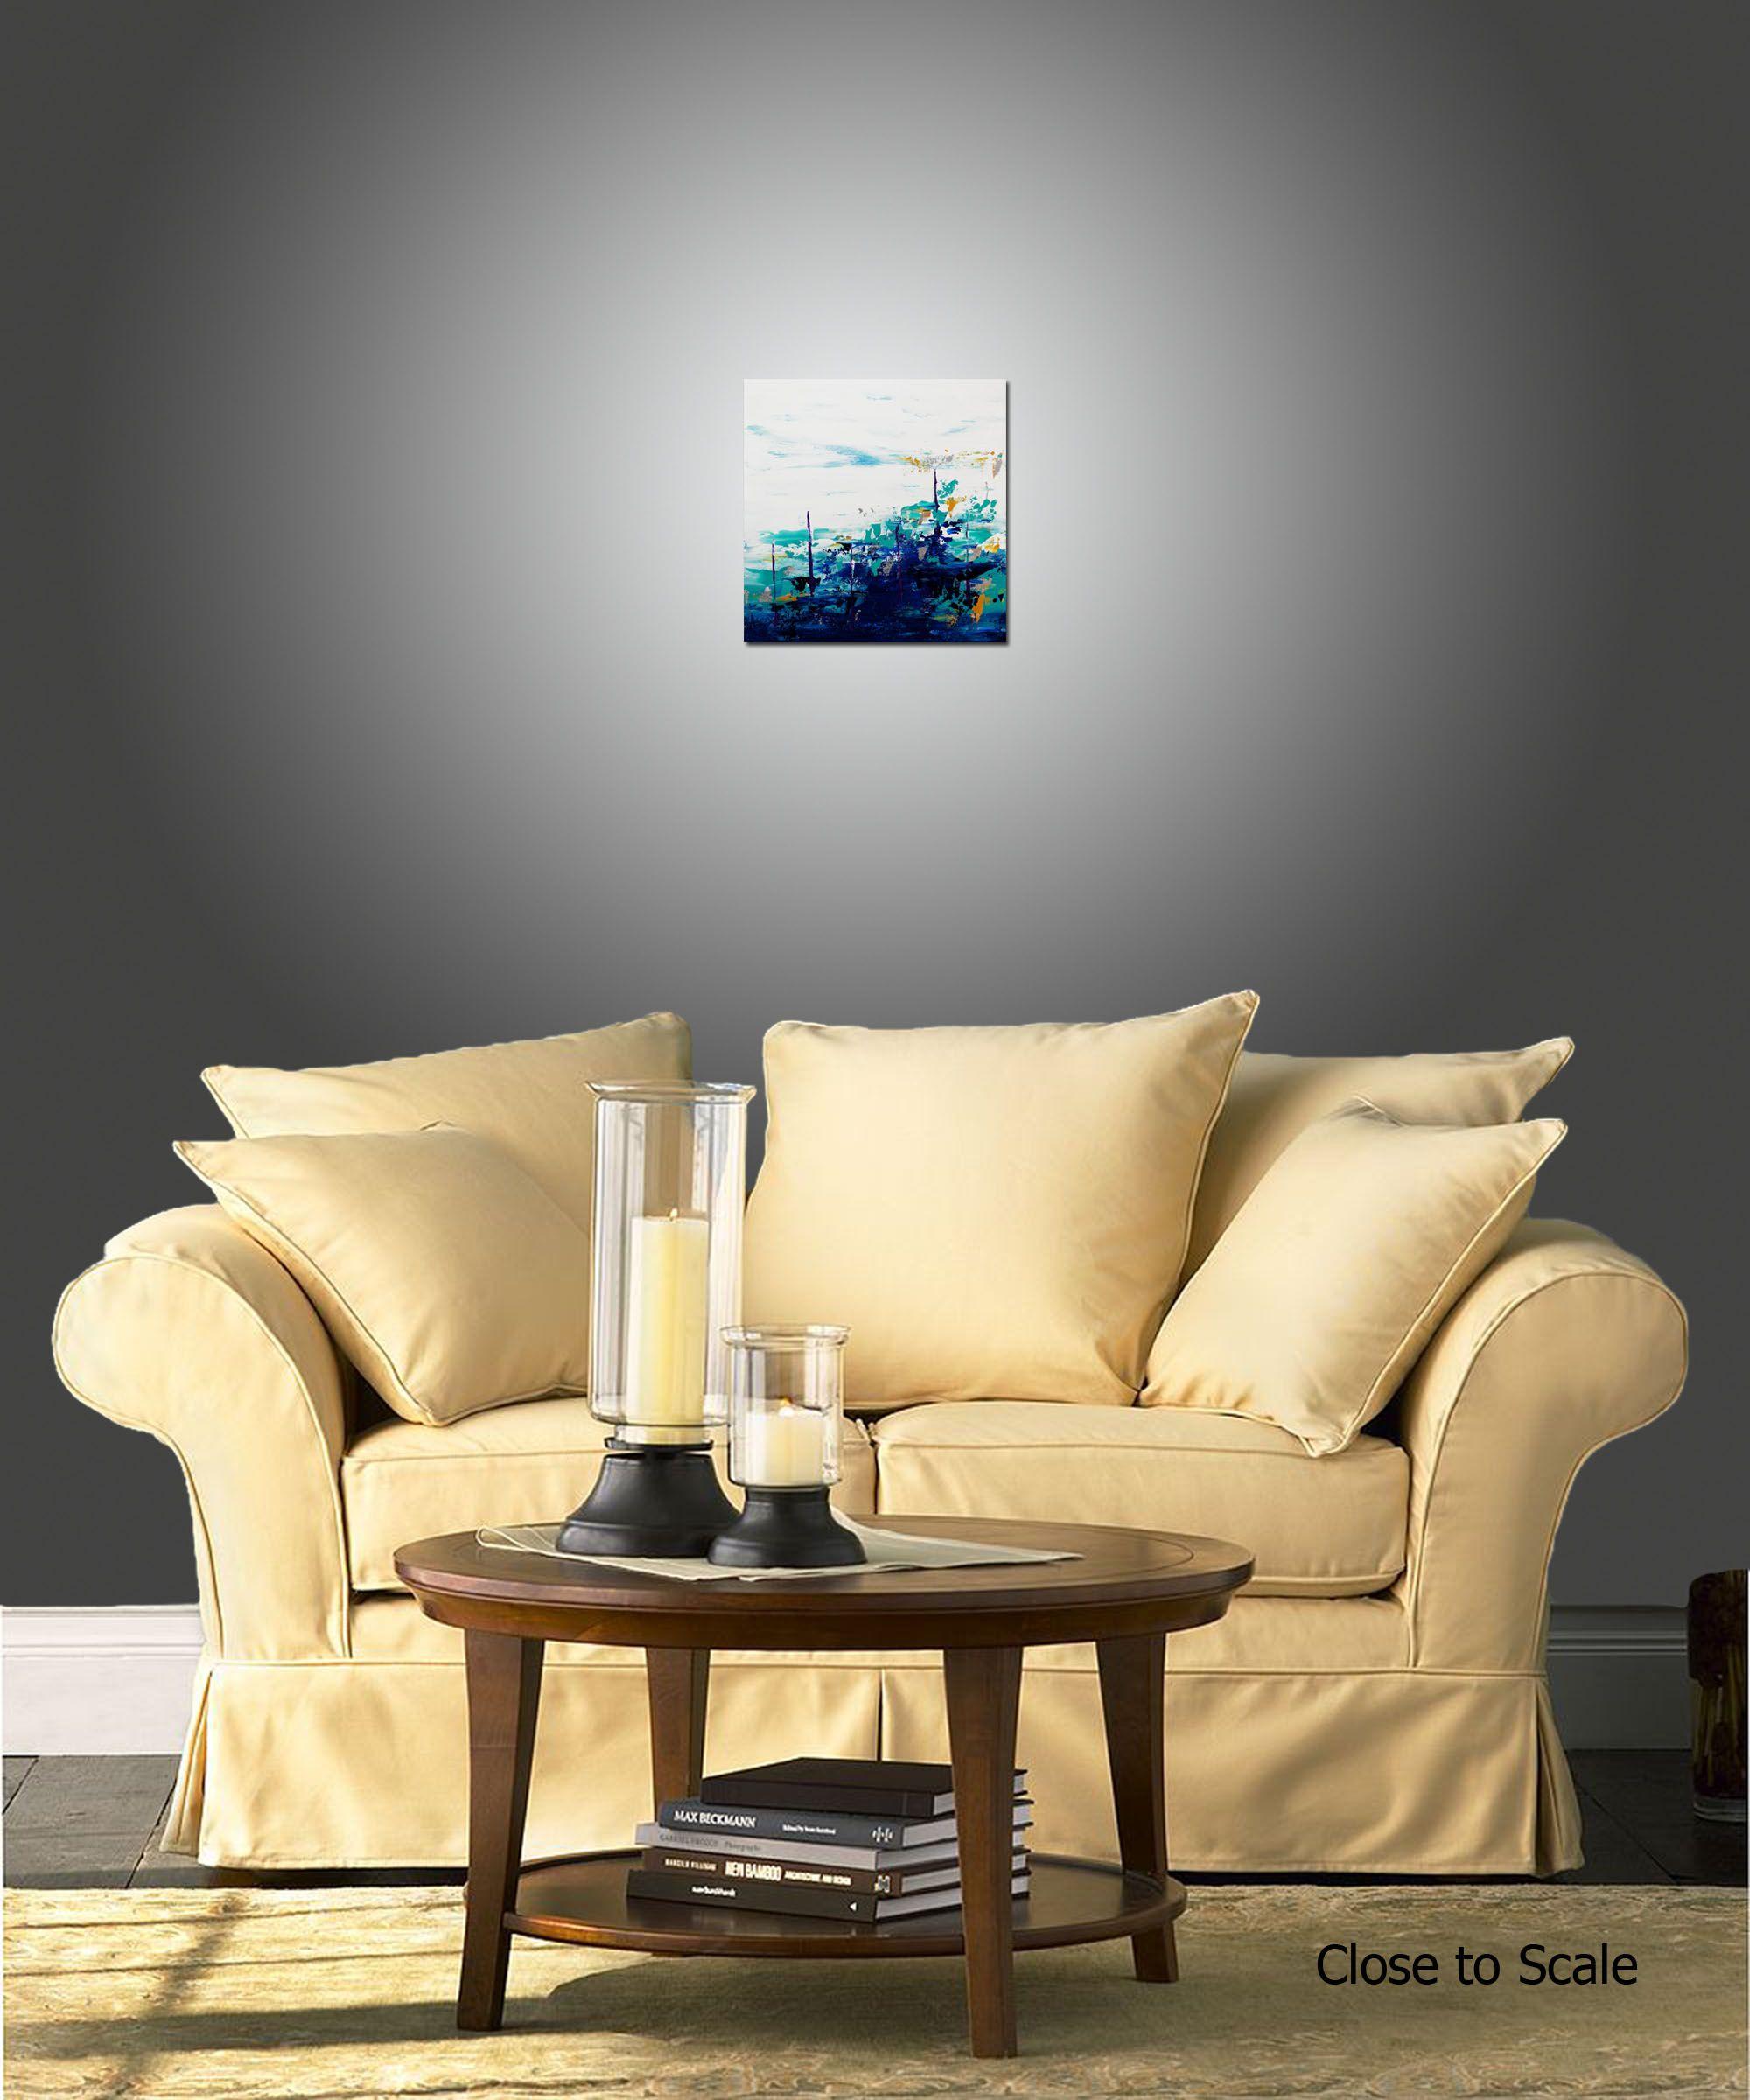 Blue Lake 11 is an original painting, created with acrylic paint on gallery-wrapped canvas. It has a width of 18 inches and a height of 18 inches with a depth of 1.5 inches (18x18x1.5).    The colors used in the painting are white, blue, teal,